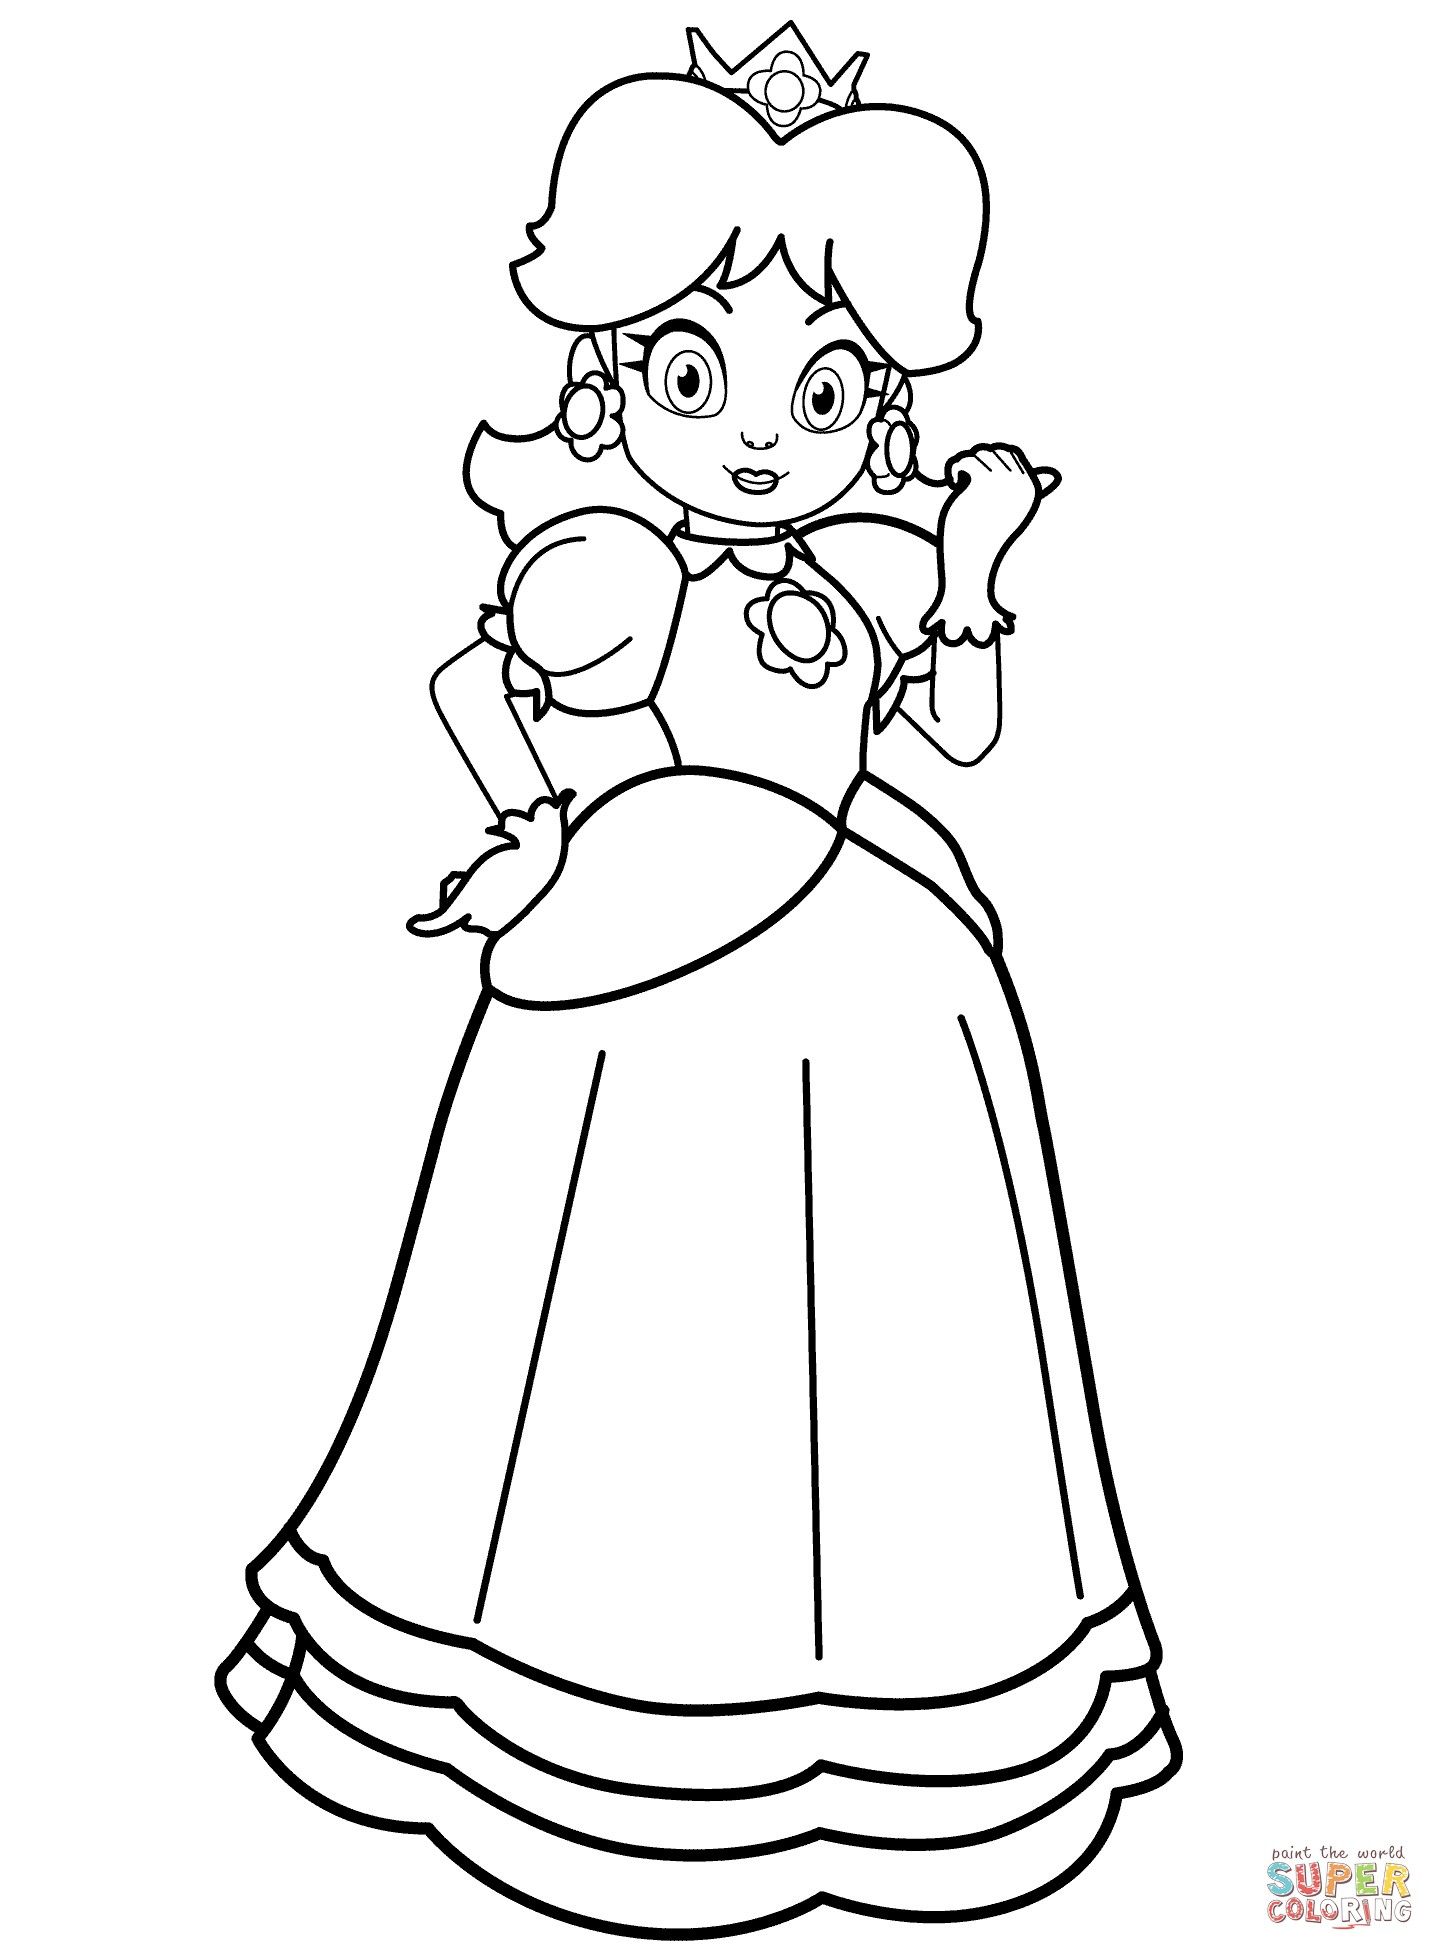 Princess Peach Coloring Pages for Kids 11